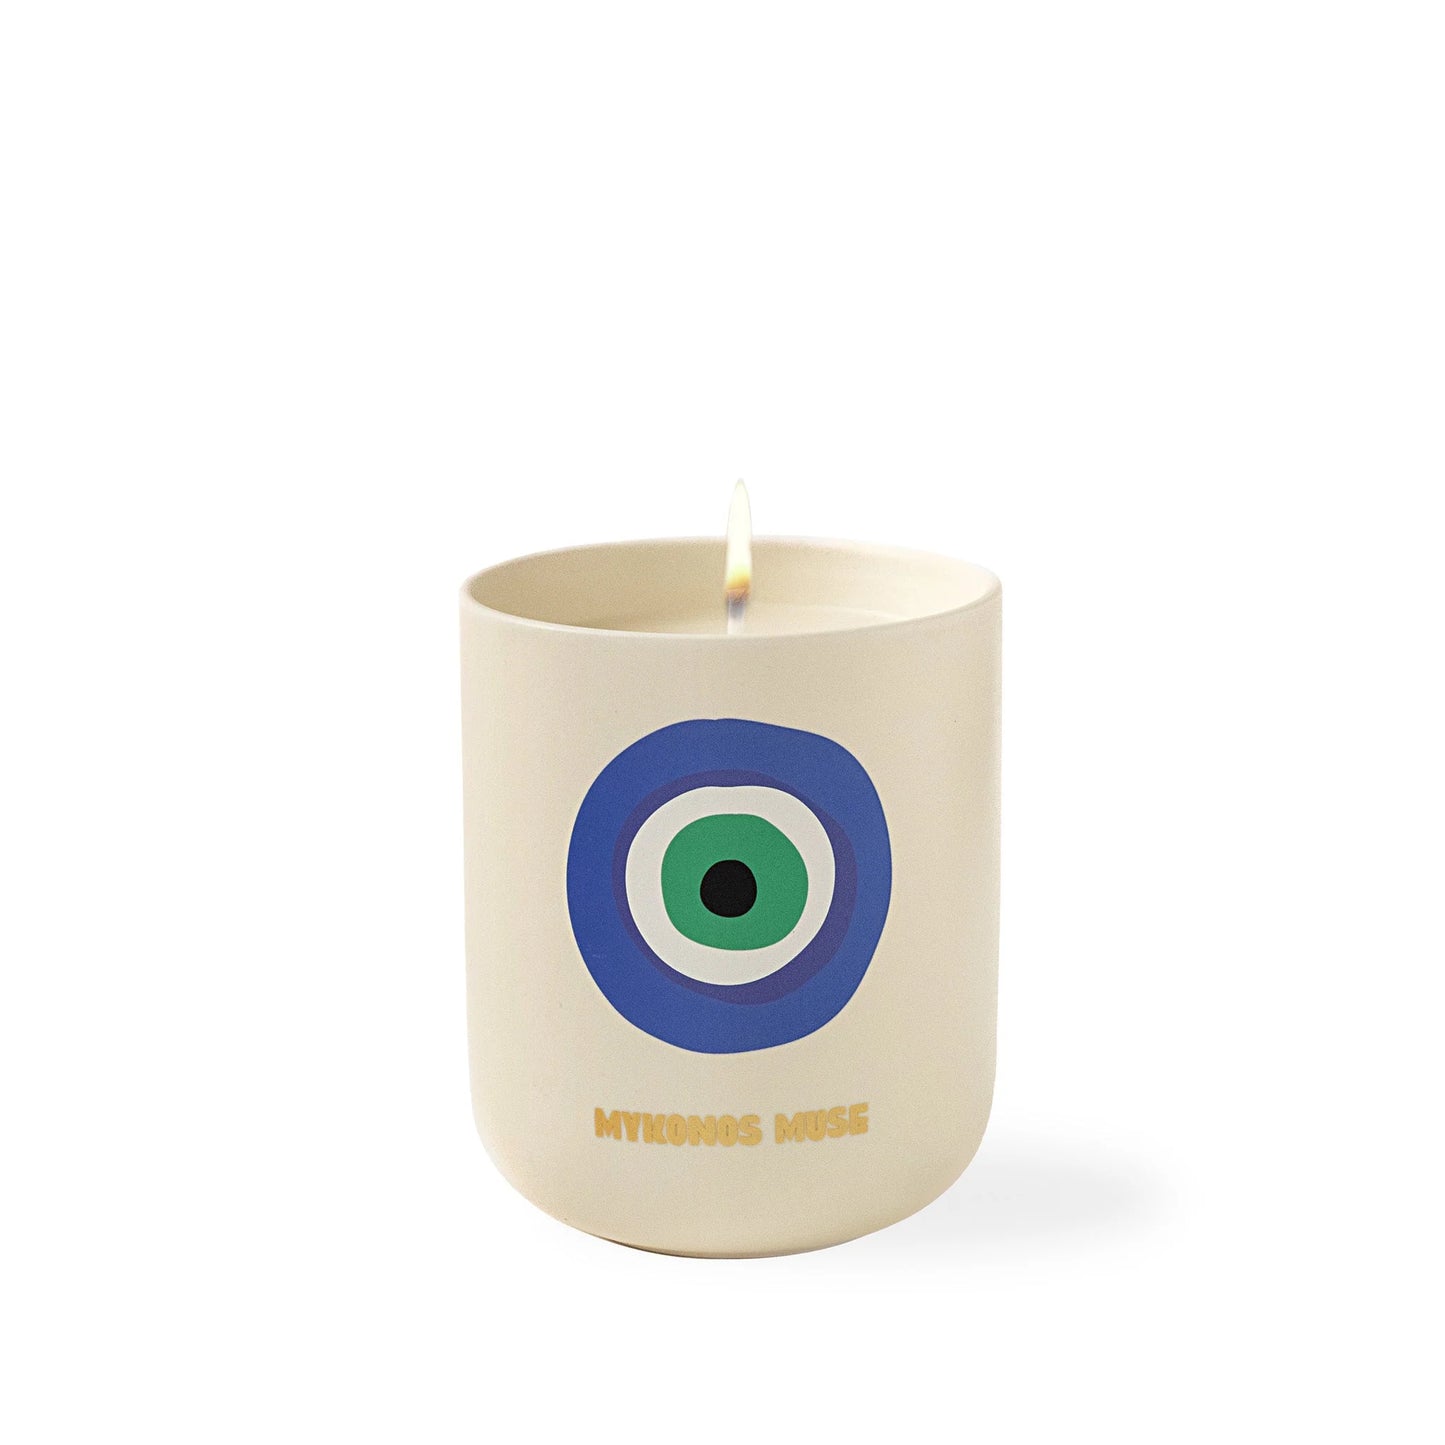 Mykonos Muse Candle - Travel from Home - Assouline